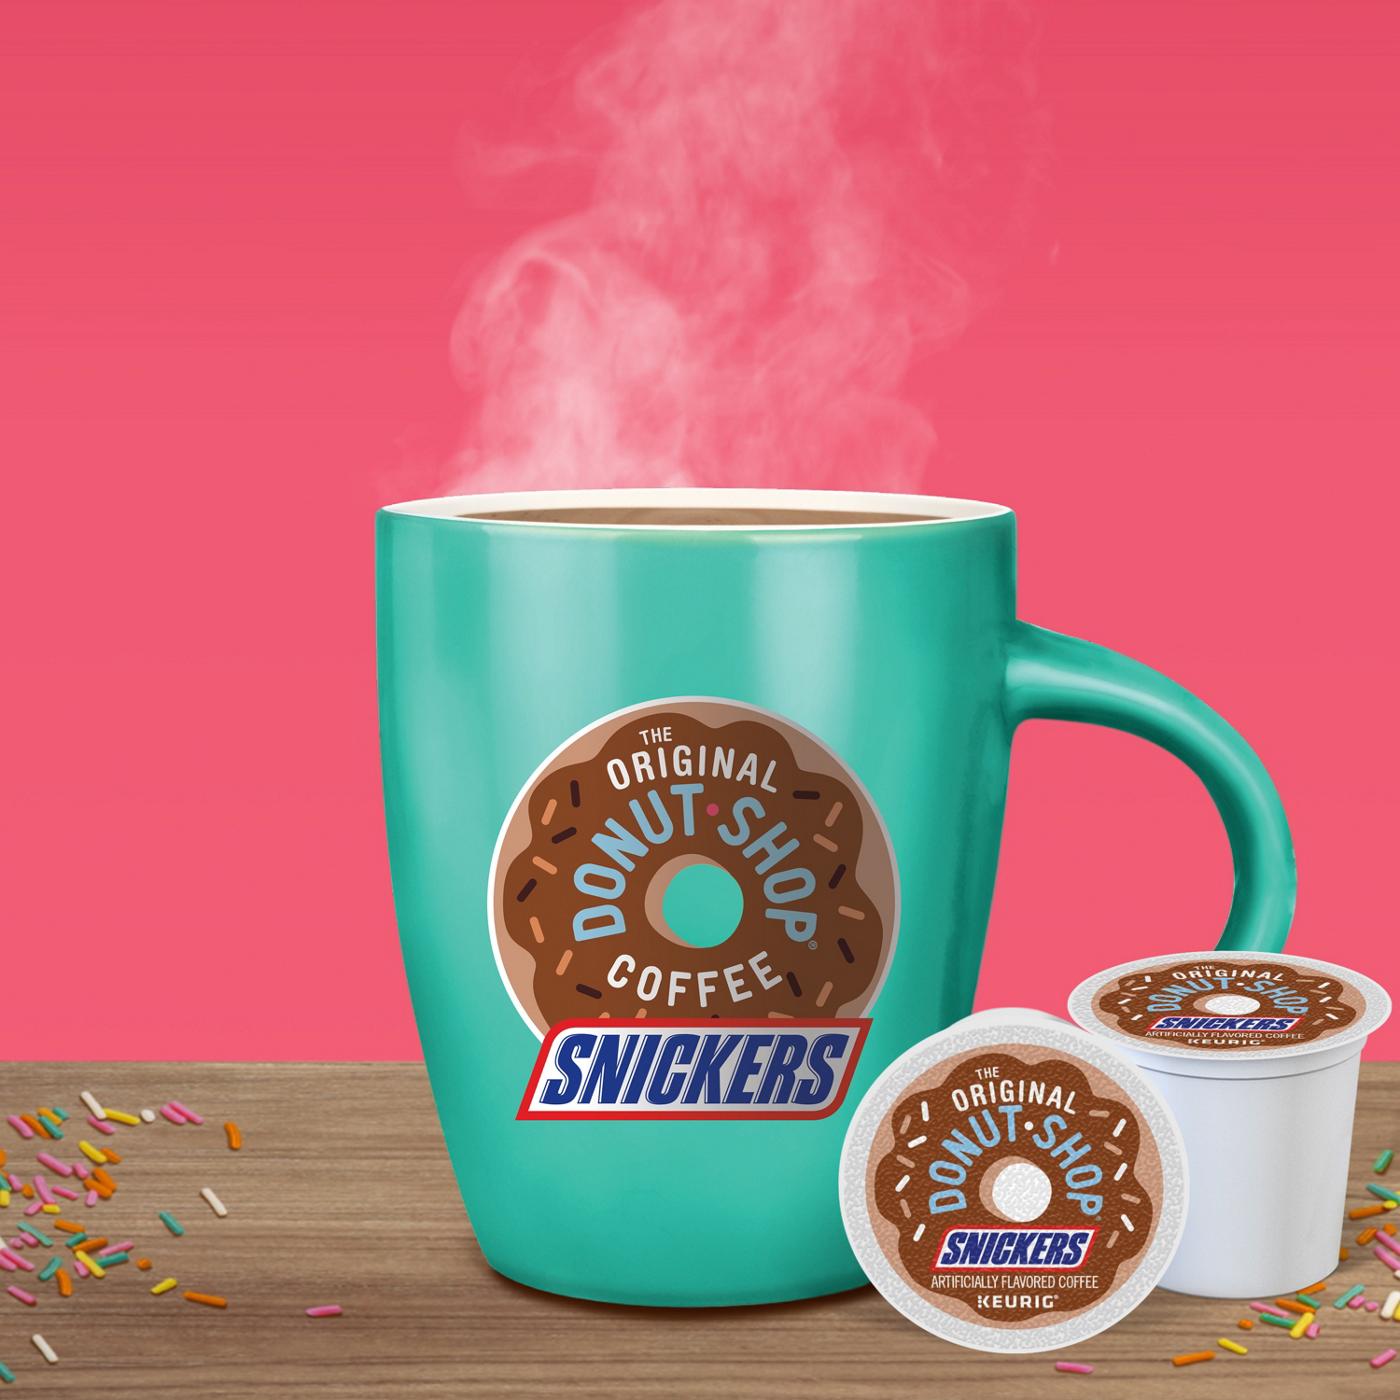 Donut Shop Snickers Single Serve Coffee K Cups; image 5 of 6